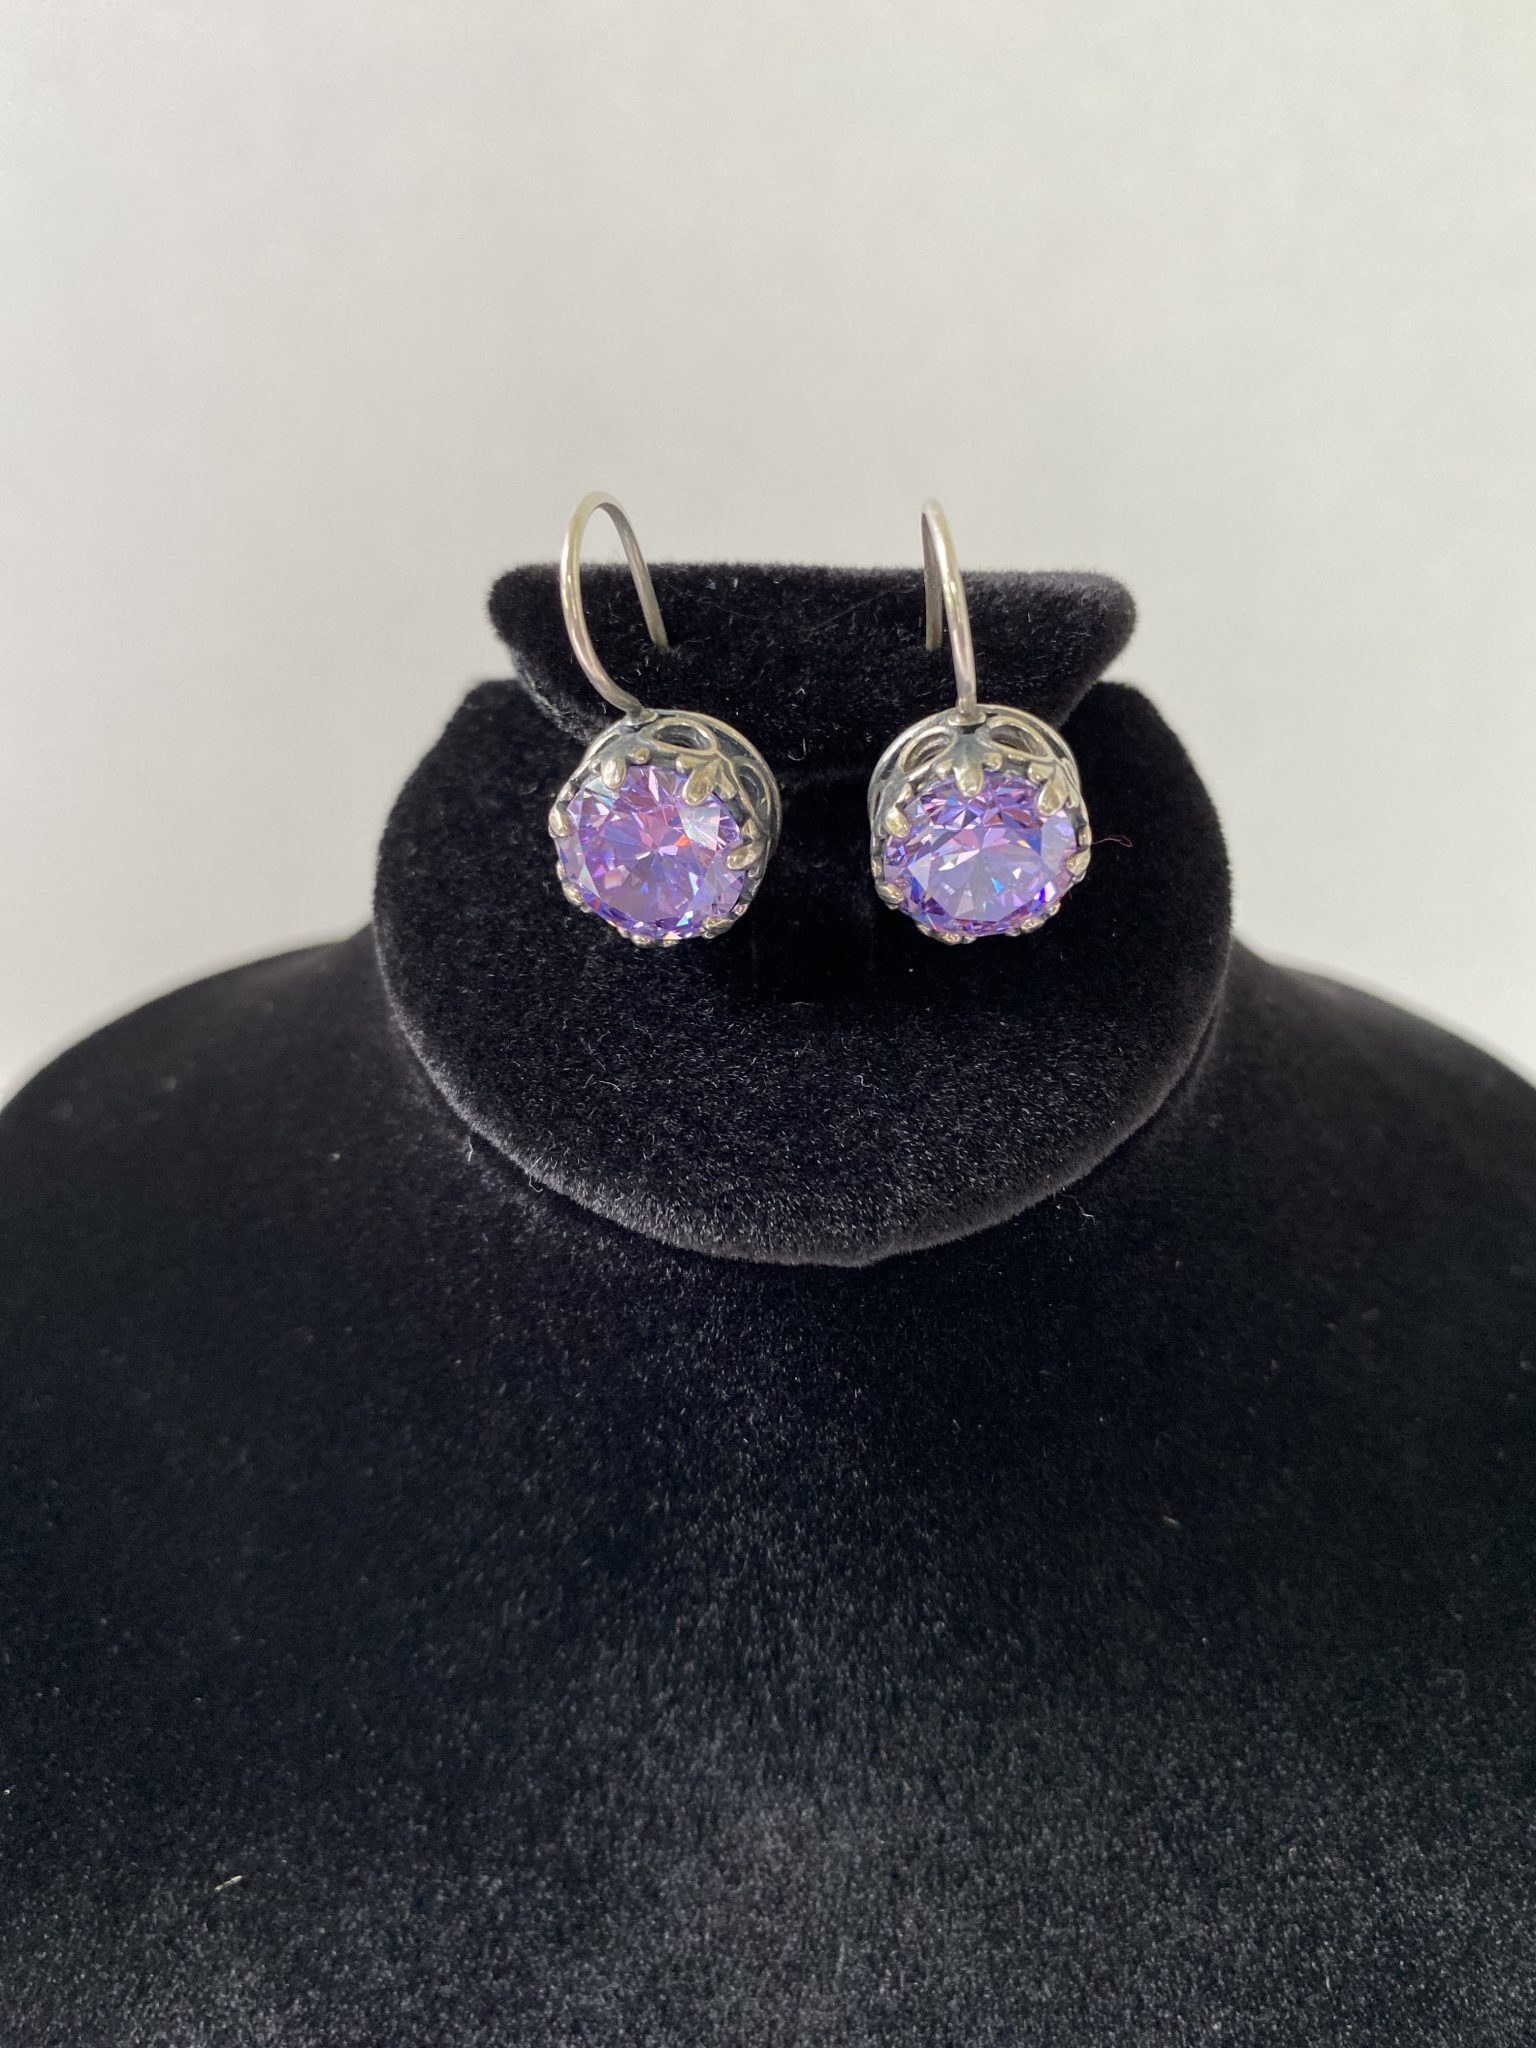 Details about   Sterling Silver SHABLOOL drop lilac Lavender CZ Earrings Jewelry 